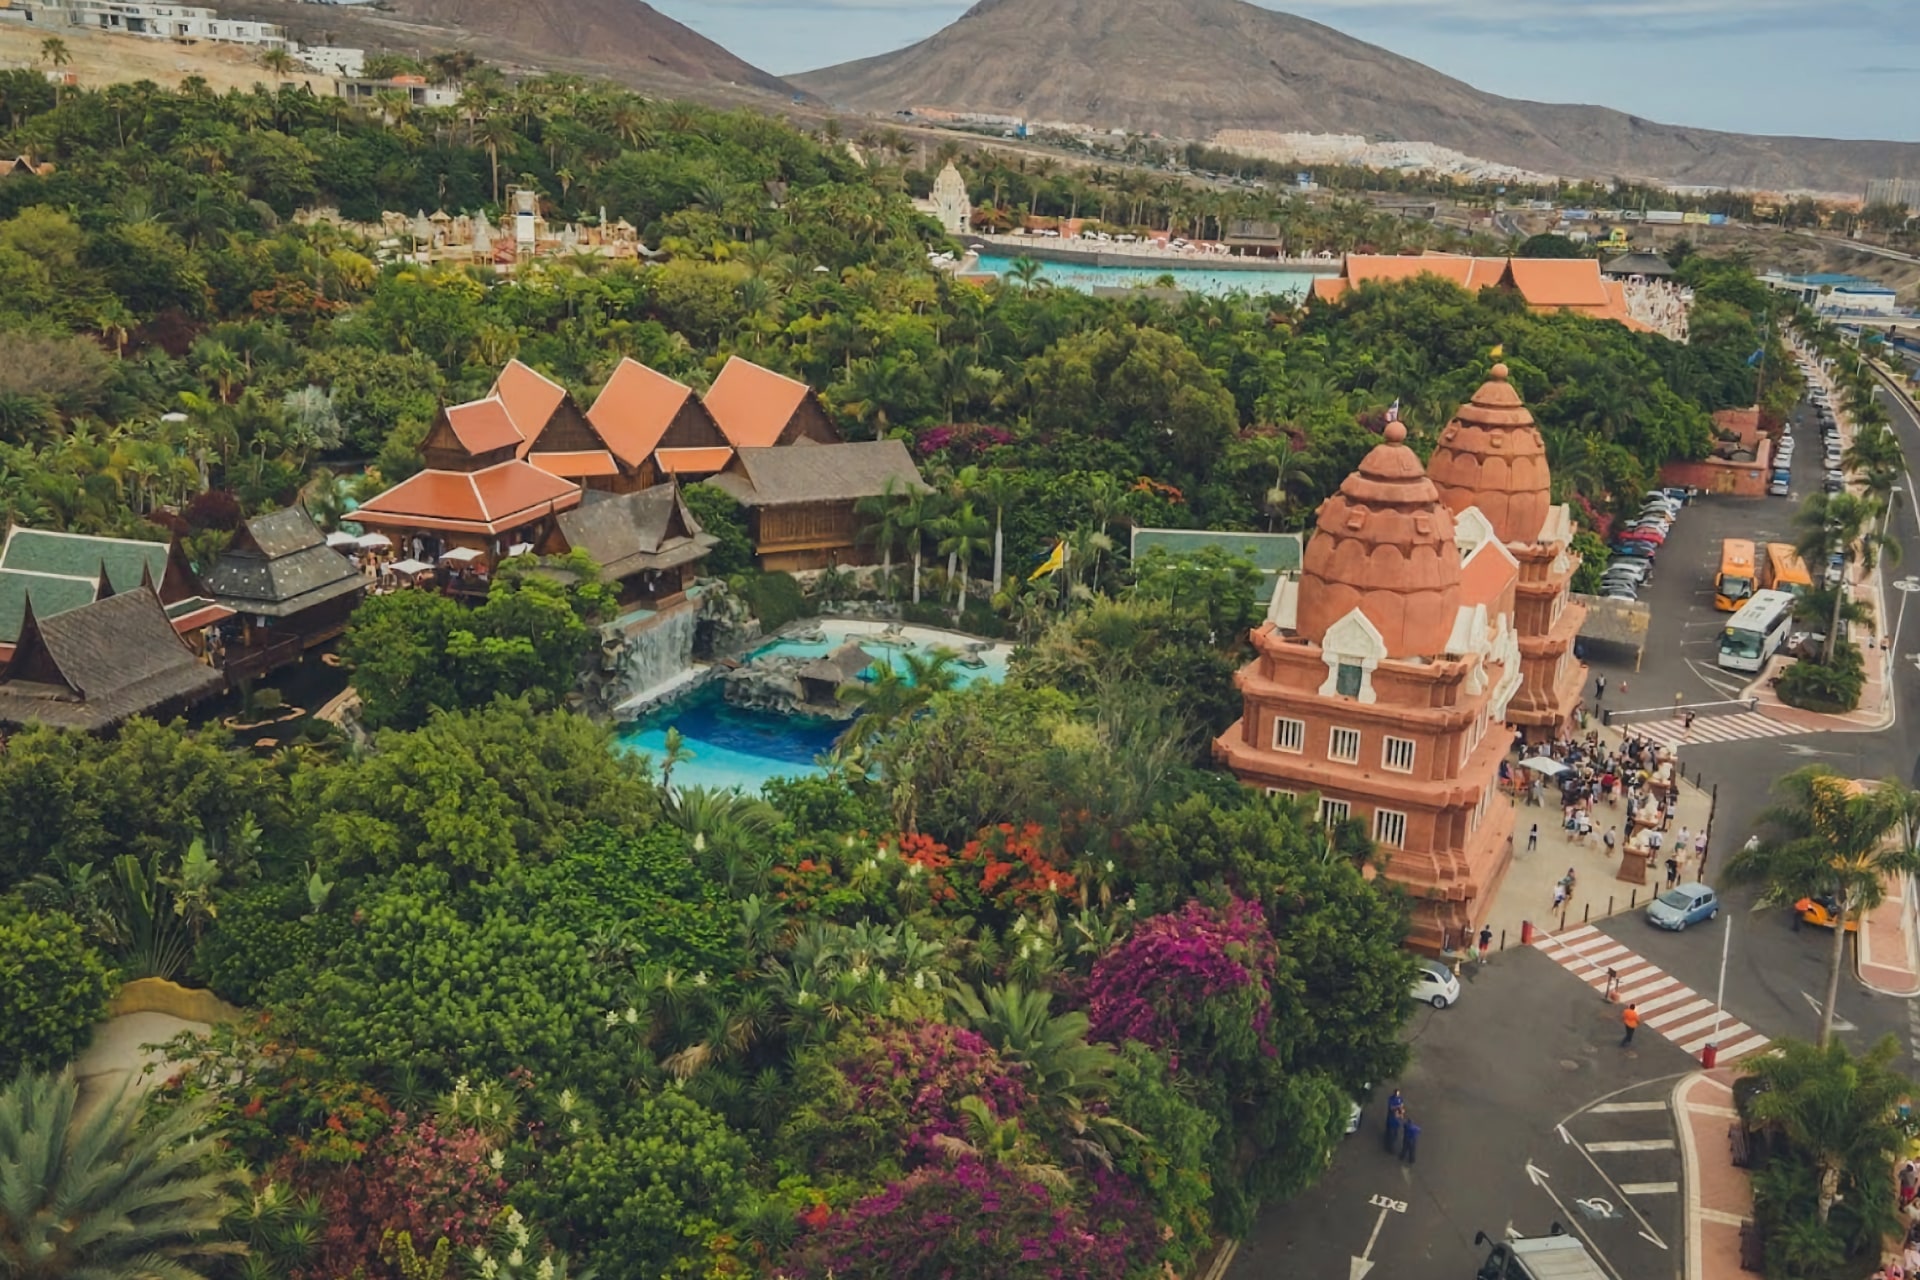 Breathtaking aerial view of Siam Park, Tenerife, showcasing the water park's expansive layout and stunning surroundings